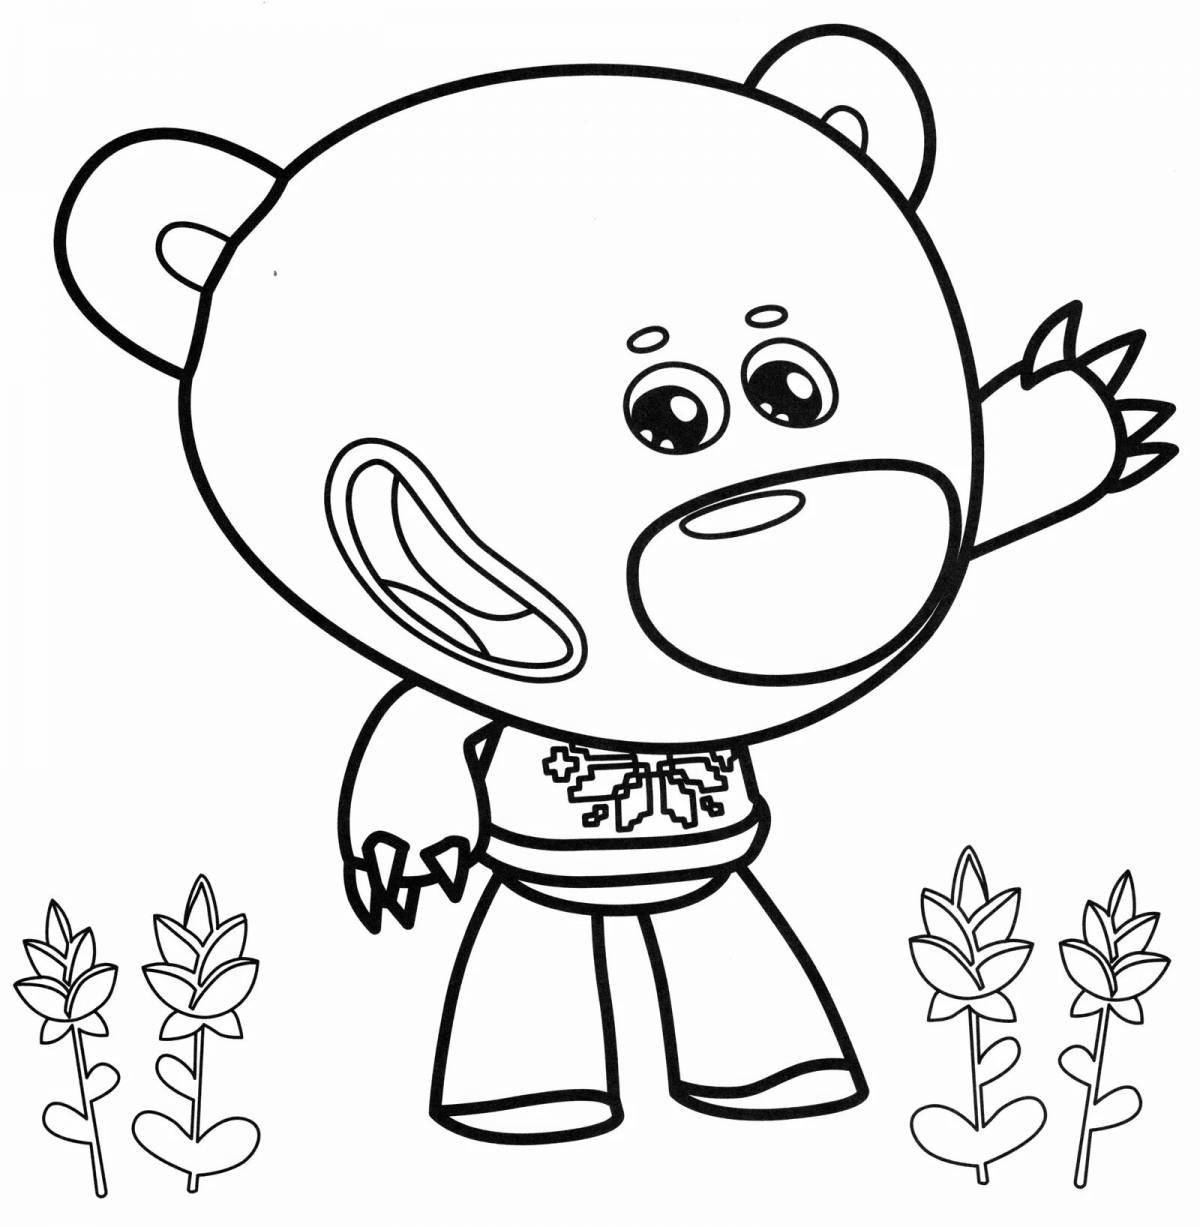 Awesome coloring pages